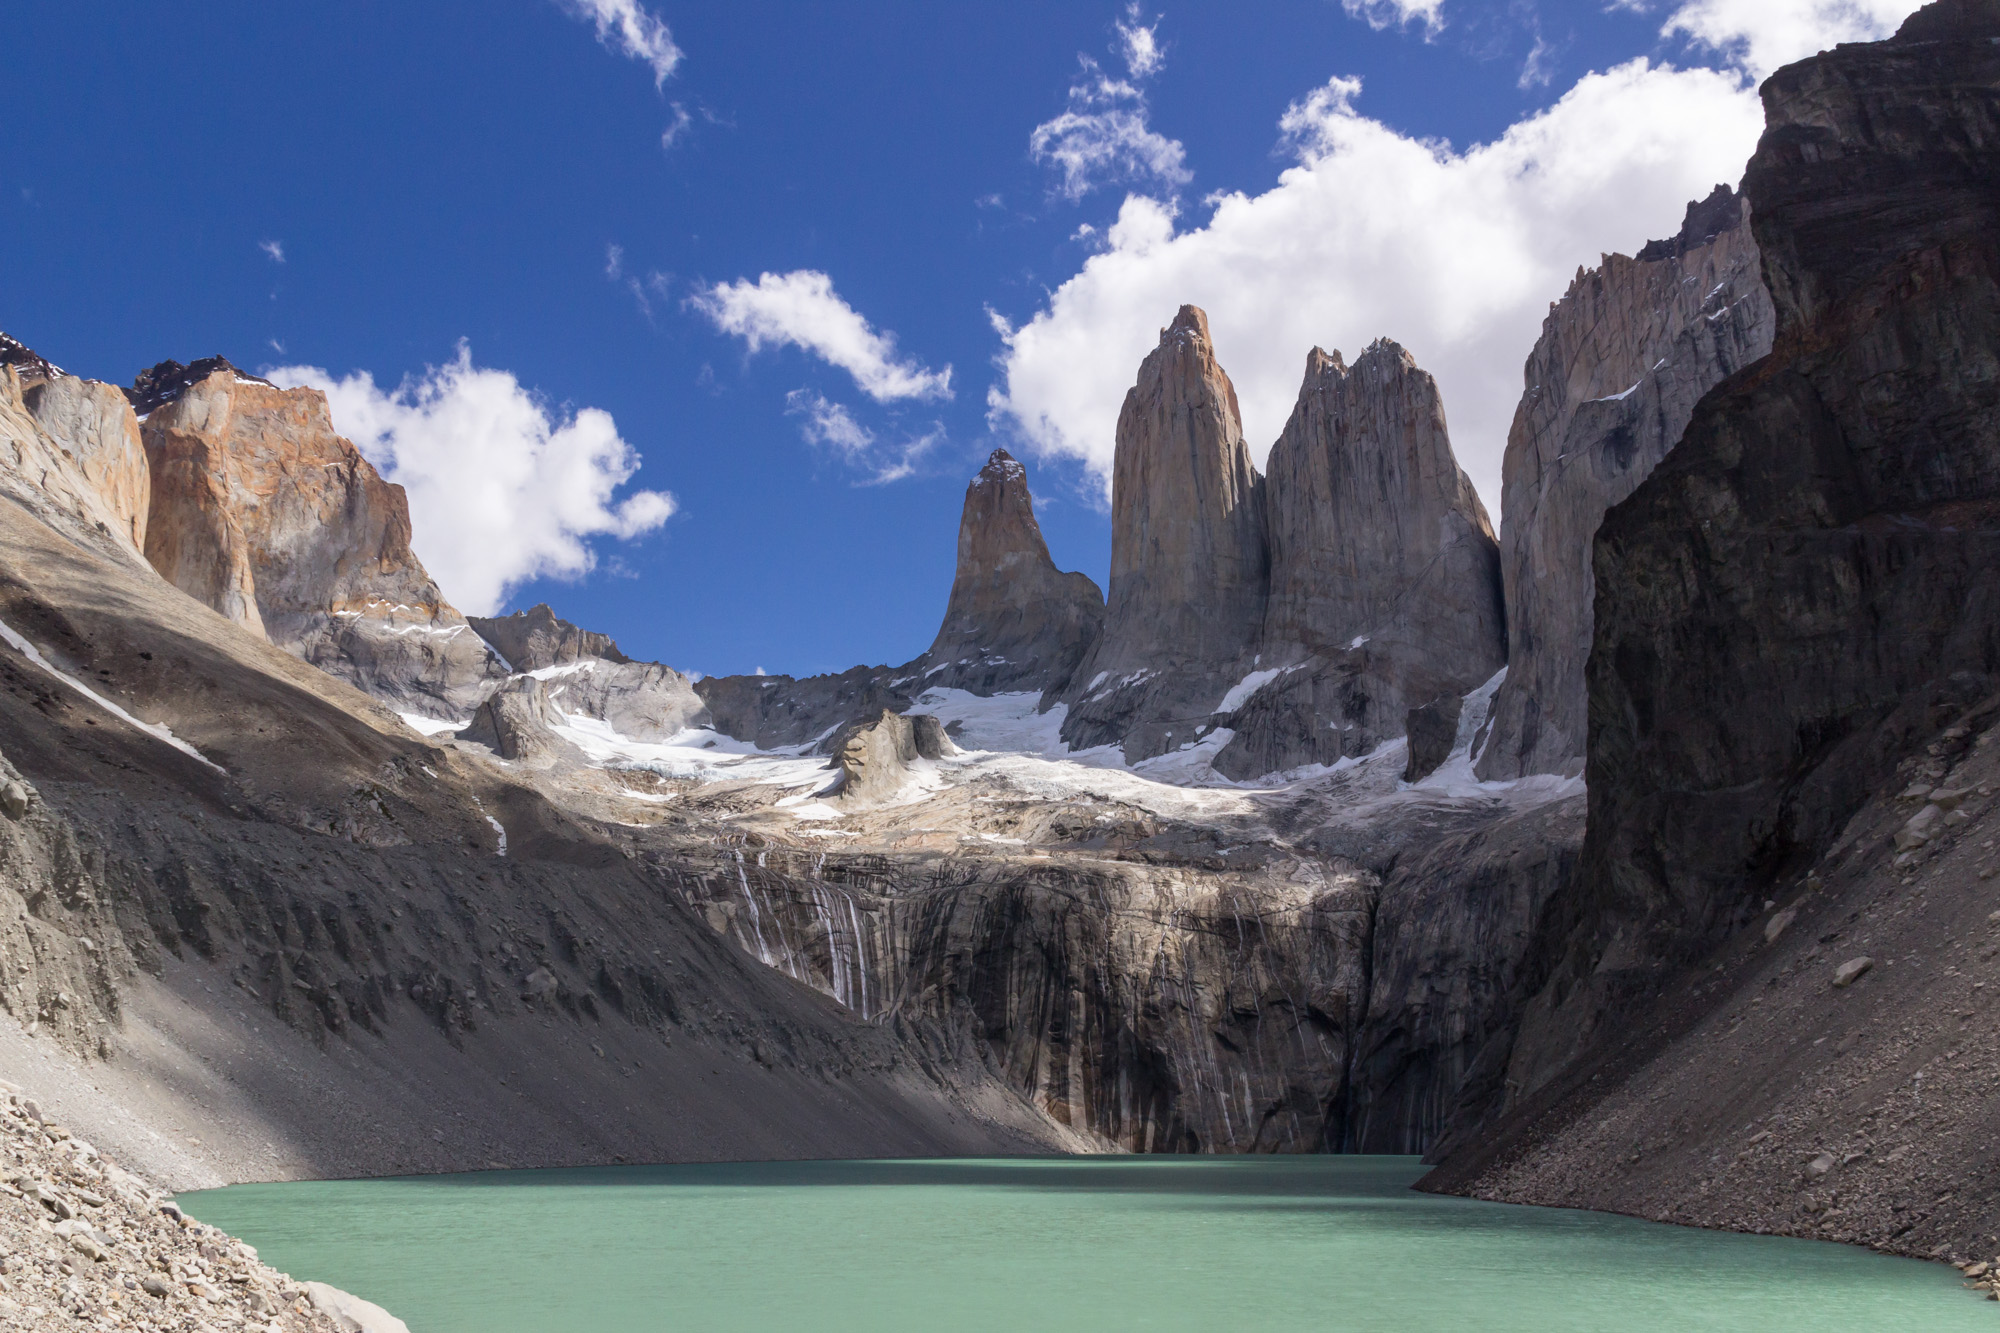 The famous Los Torres del Paine in all their granitic glory! 